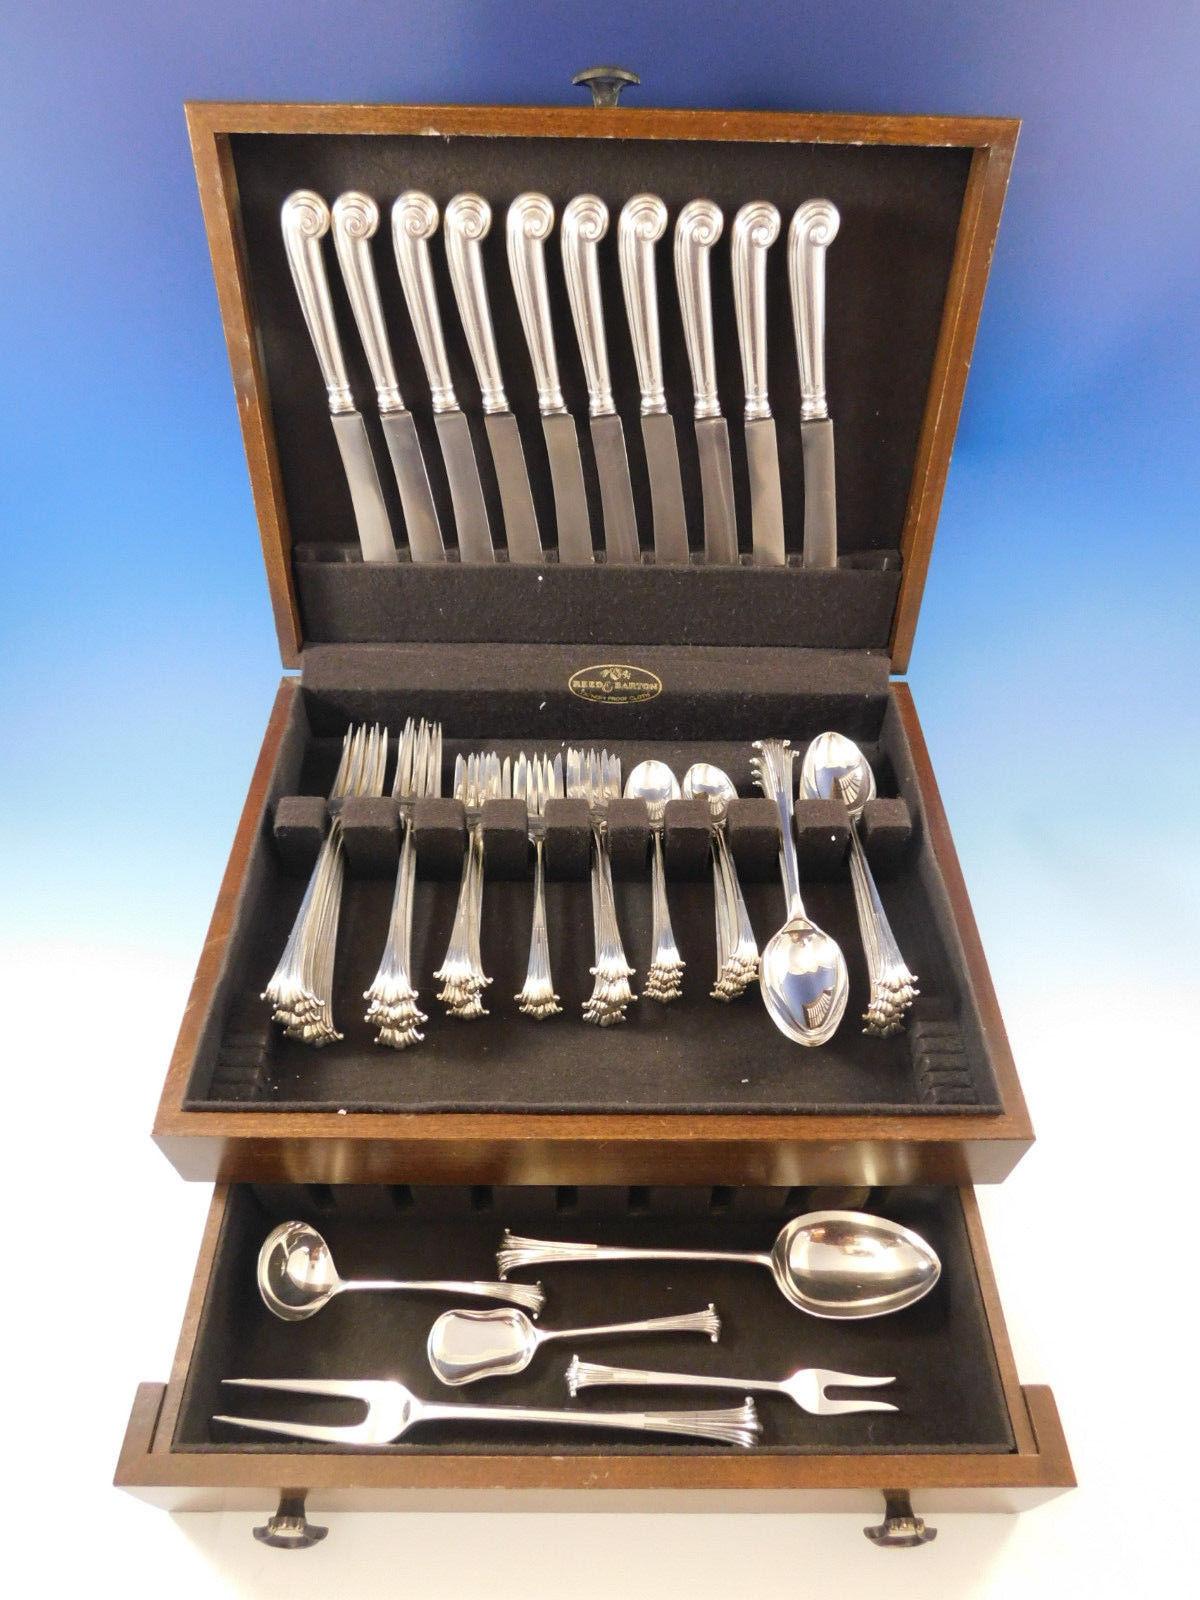 Superb Onslow by Marshall Fields (retailer) English sterling silver flatware set of 55 pieces. This set includes:

Ten dinner size knives, pistol grip, 9 5/8